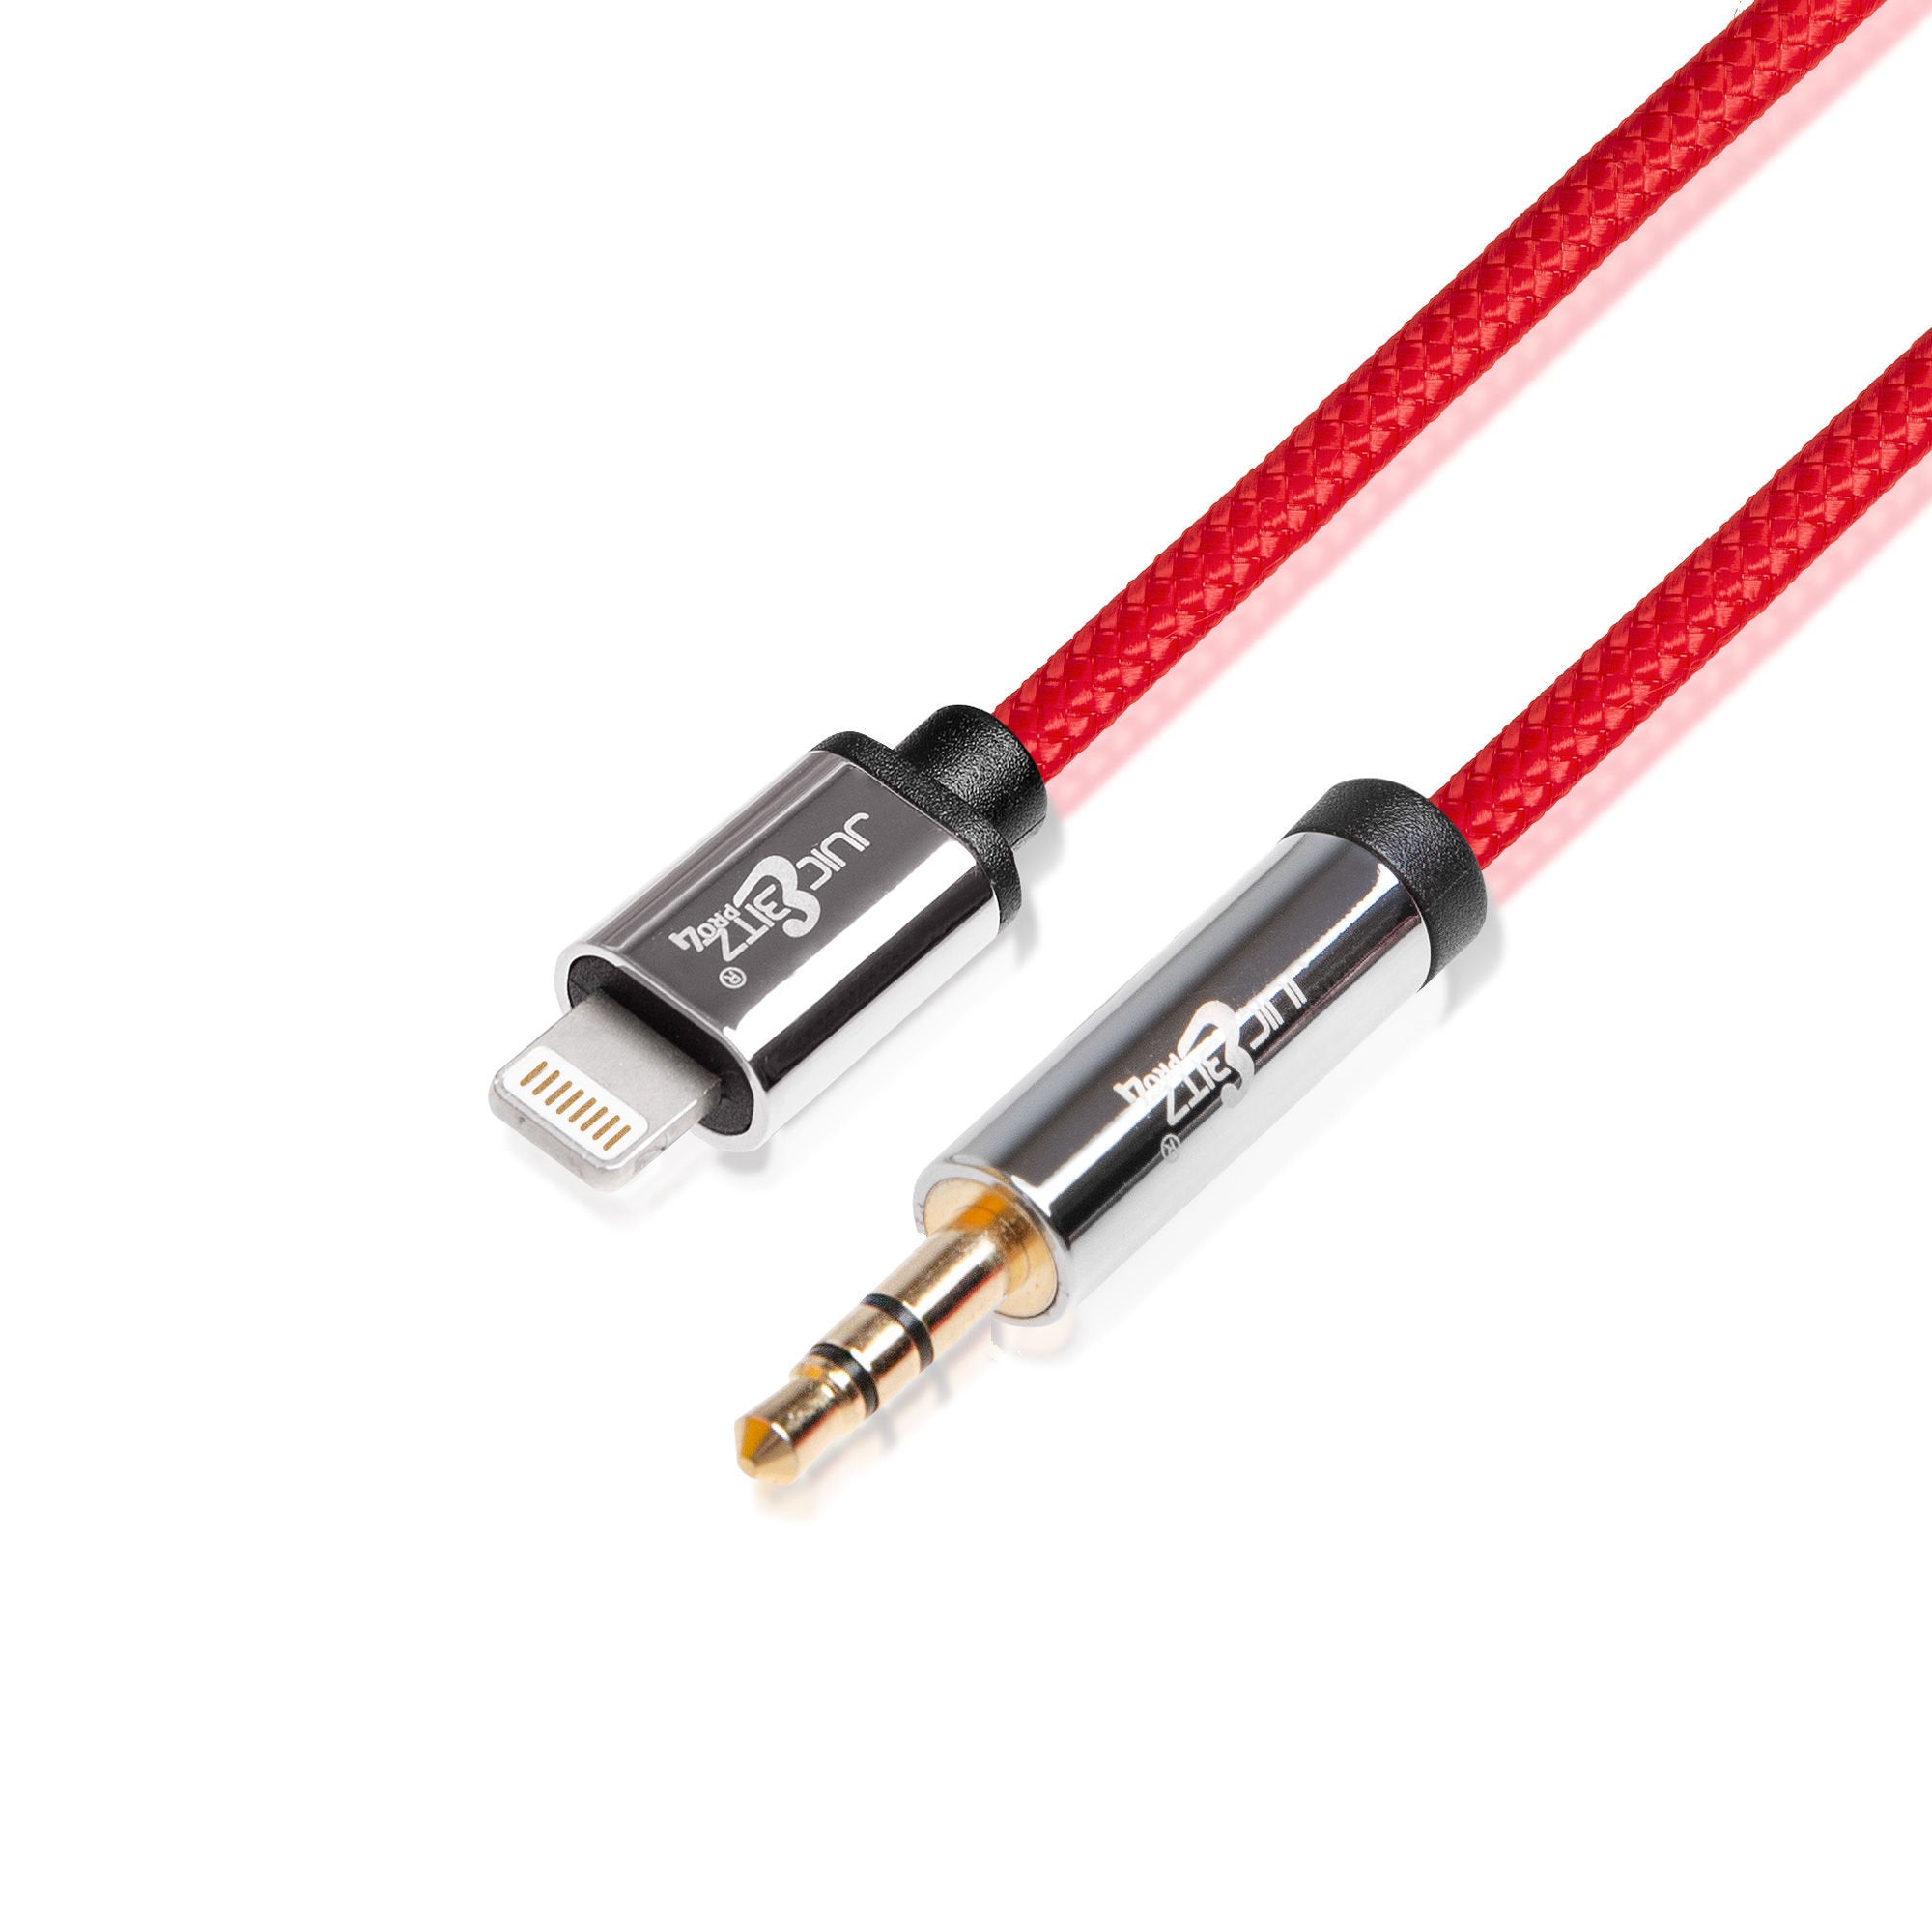 PRO Series 3.5mm Braided Coiled AUX to 8 Pin Stereo Jack Lead for iPhone, iPad, iPod